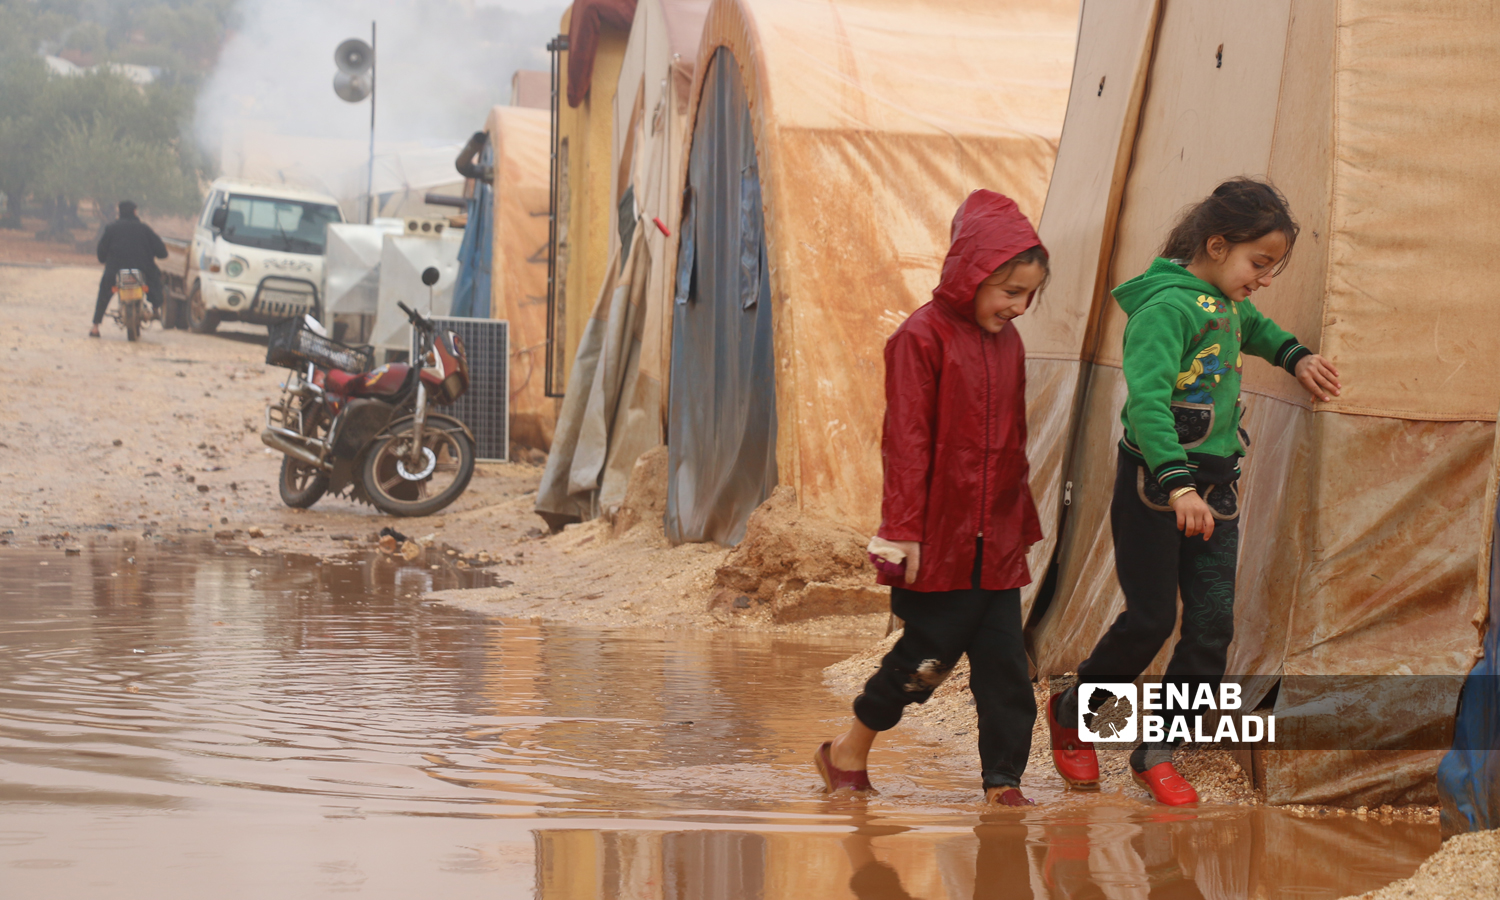 Two Syrian children walking to their tent through a rainwater puddle in the displacement camps of Idlib countryside - December 2021 (Enab Baladi/Iyad Abdul Jawad)